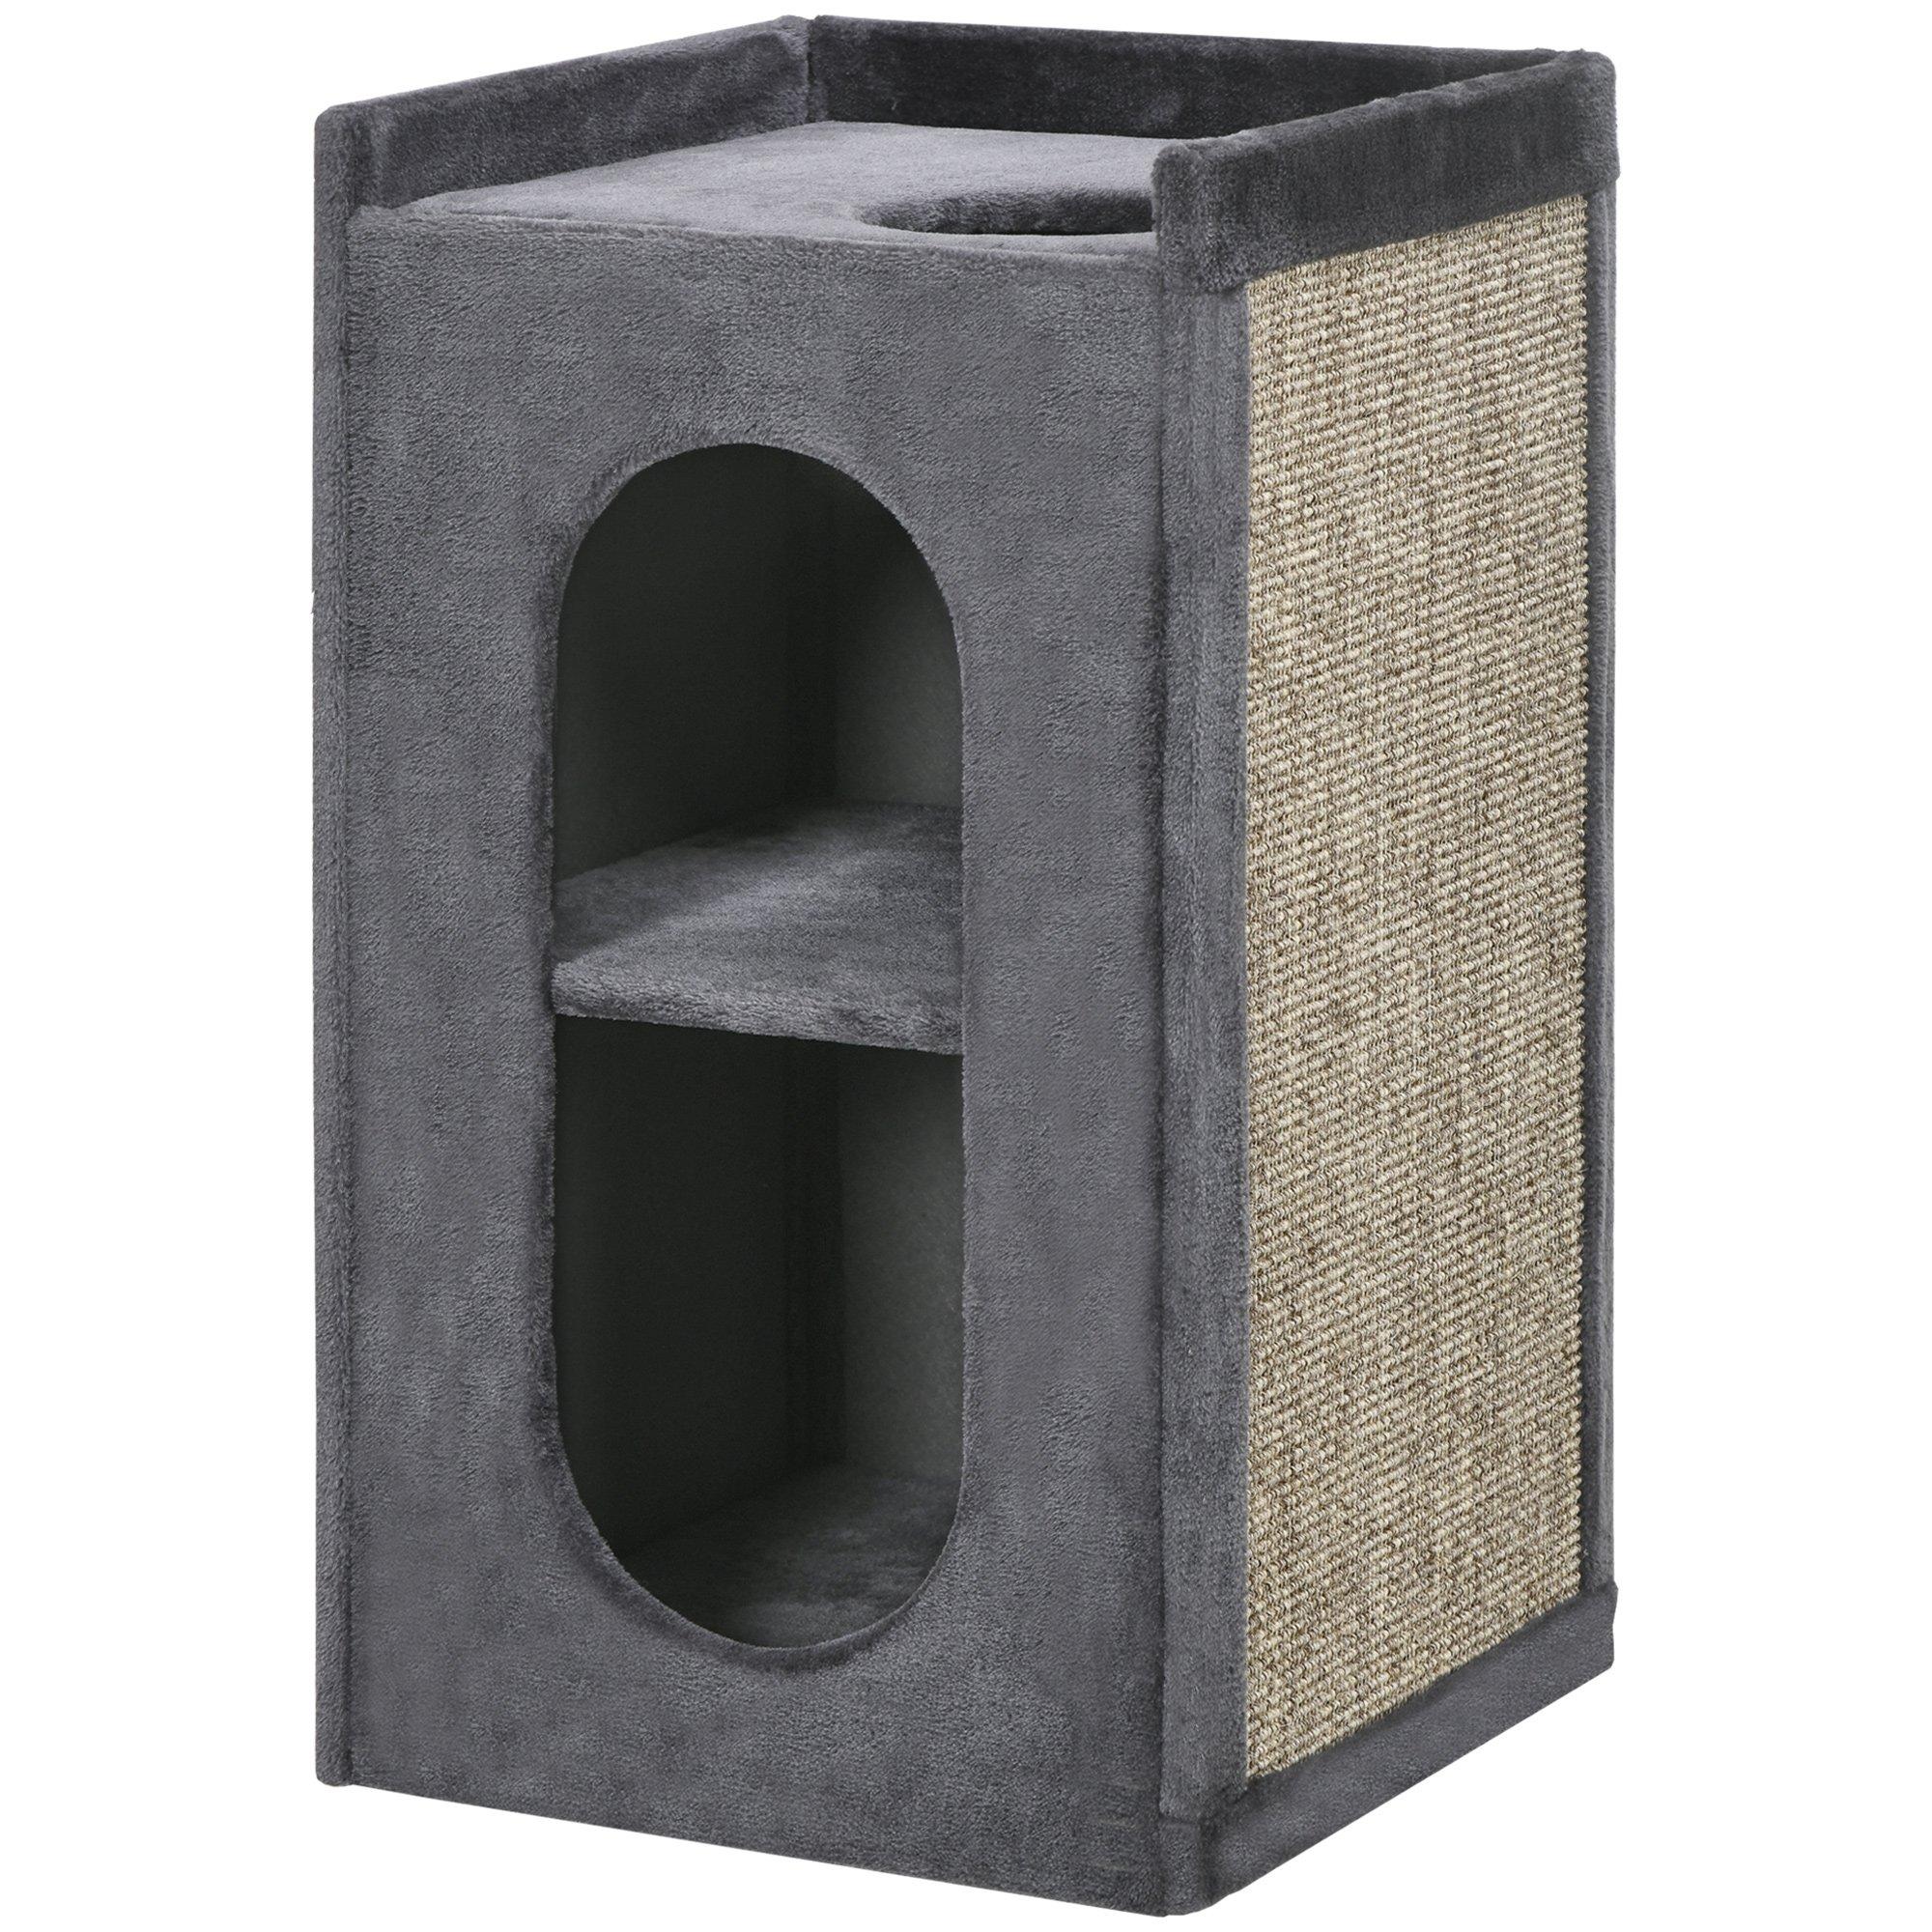 81cm Cat Scratching Barrel with Two Cat Houses for Indoor Cats